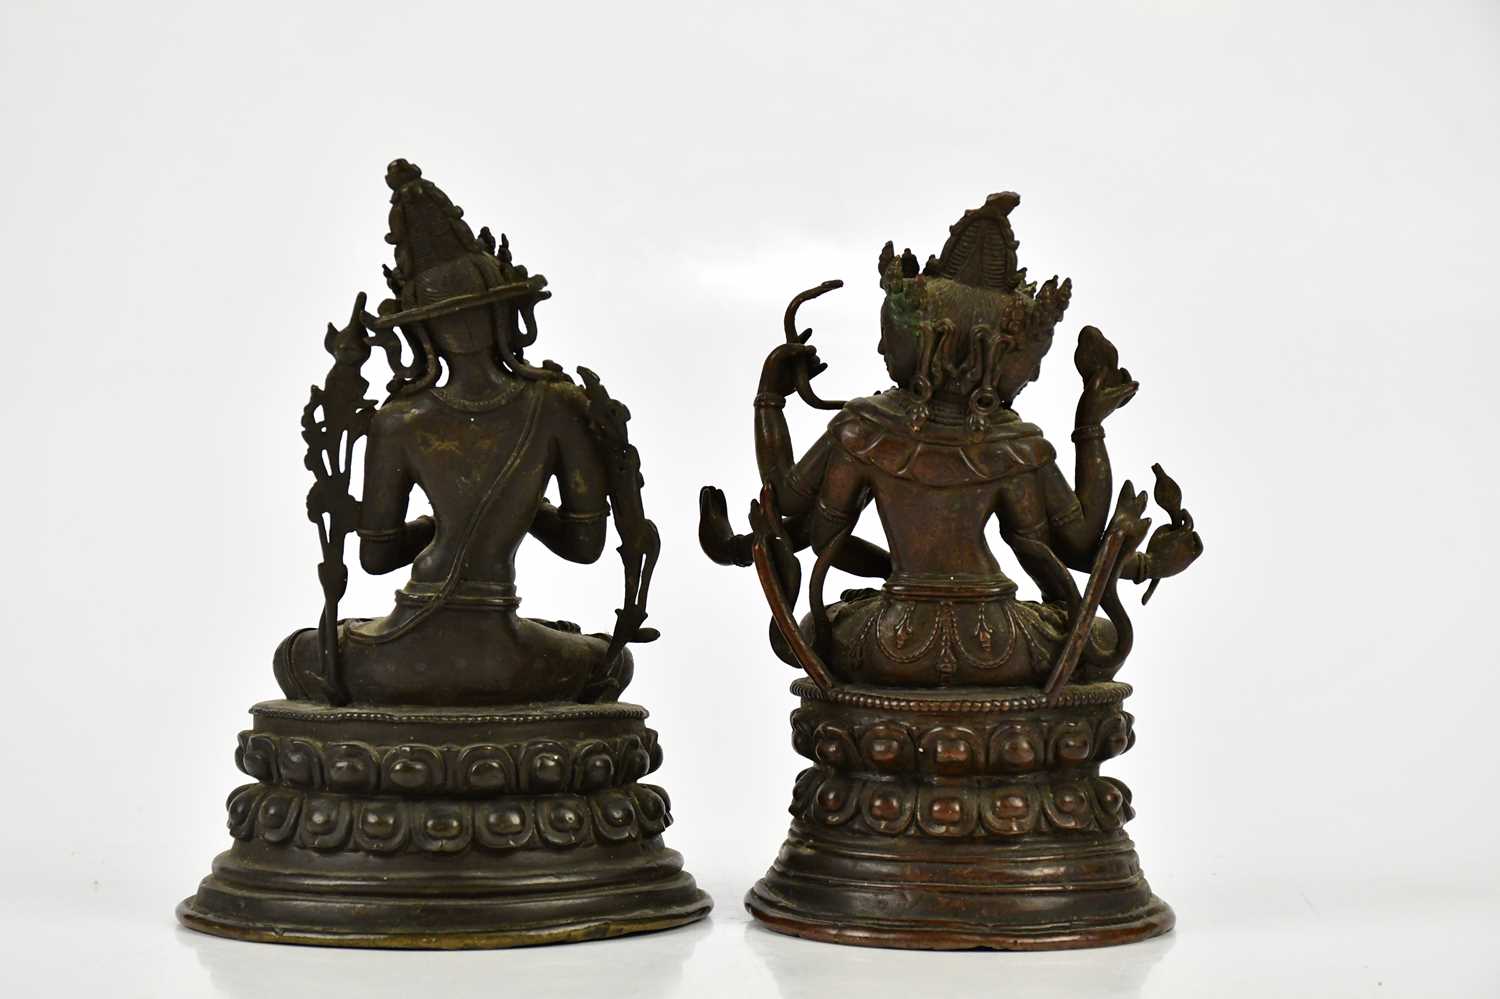 A Chinese bronze figure of a female deity with four arms, with leaf shaped back plate and oval base, - Image 6 of 6